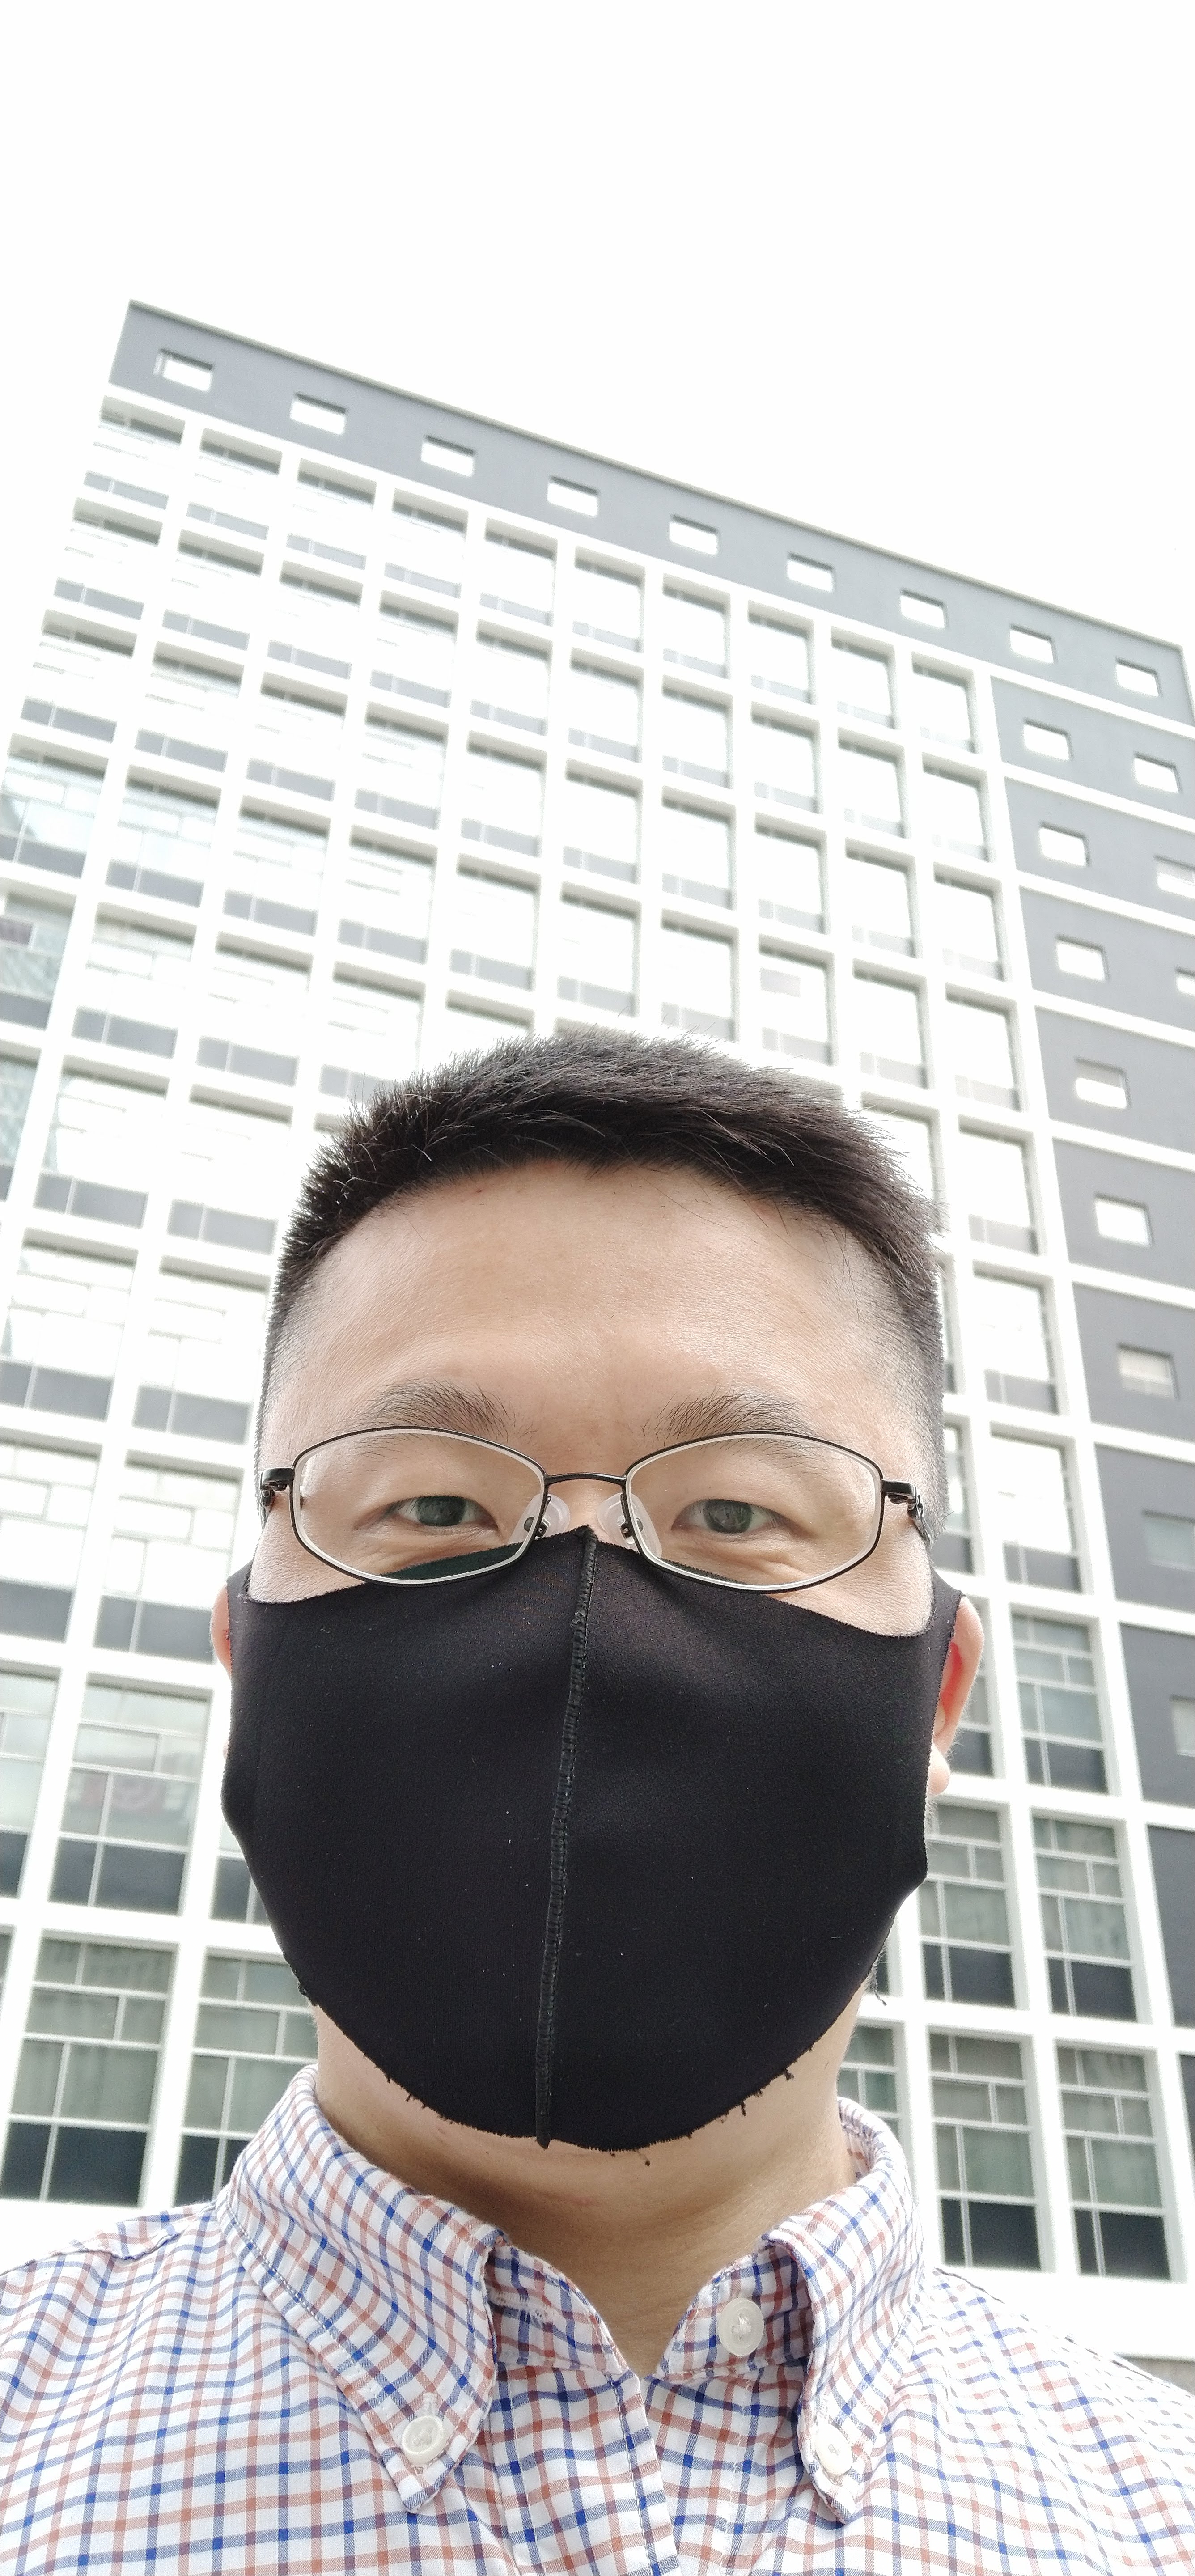 Frank the tour guide takes selfie in front of the Hong Kong City Hall